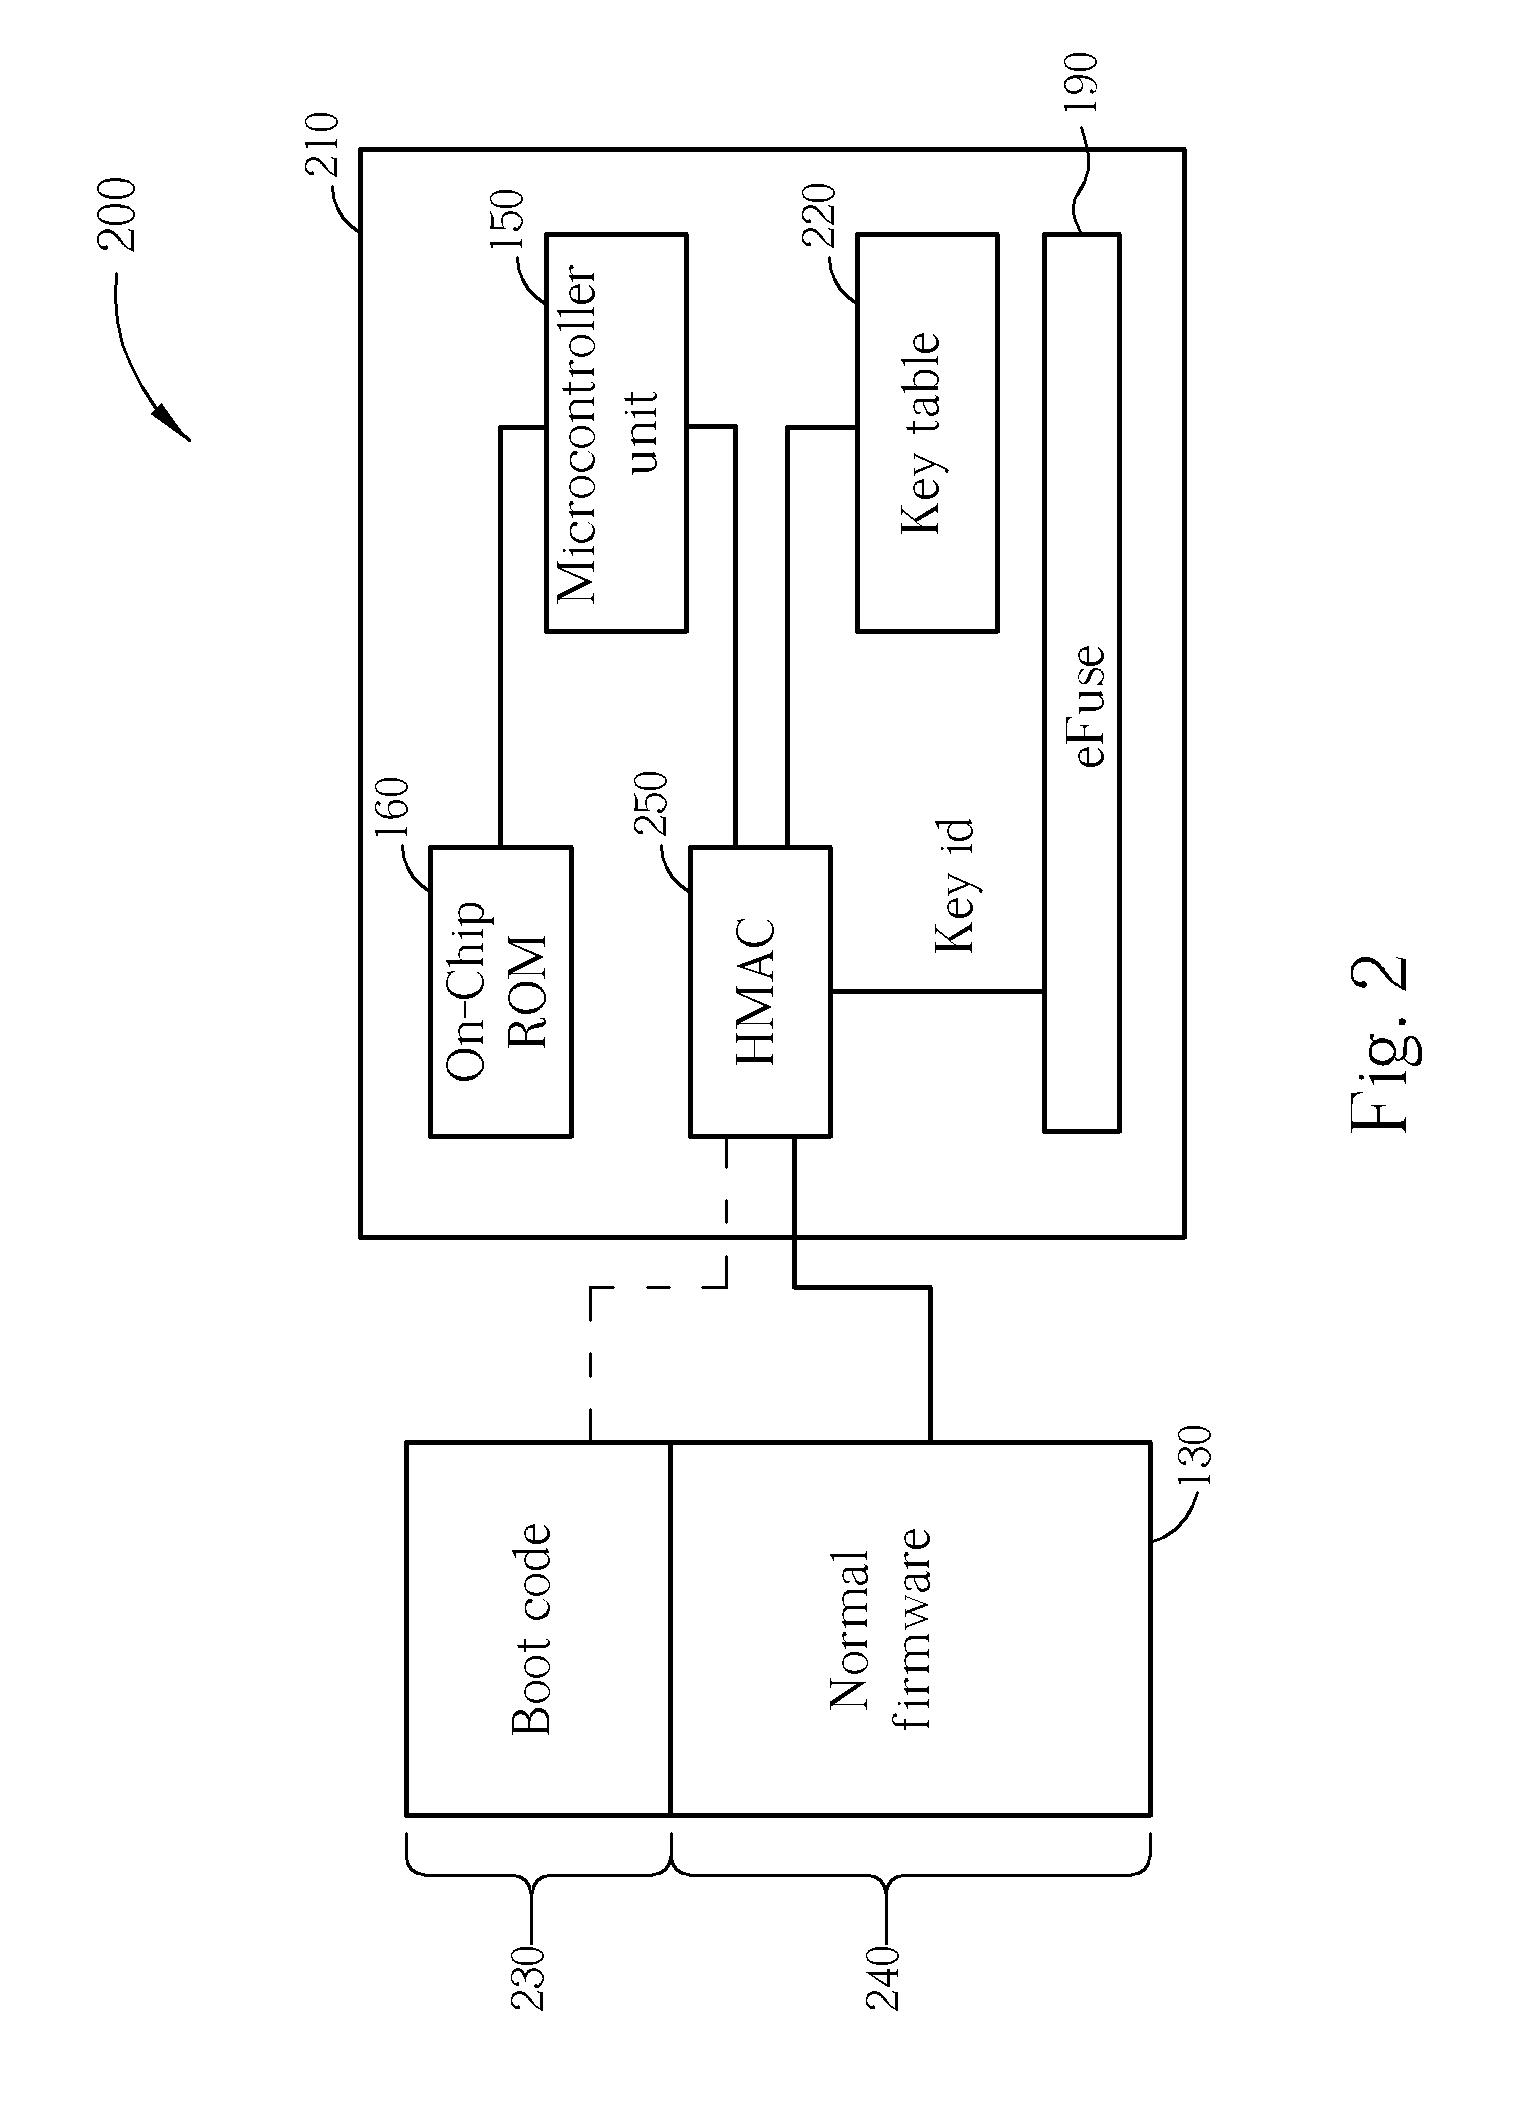 Embedded system insuring security and integrity, and method of increasing security thereof